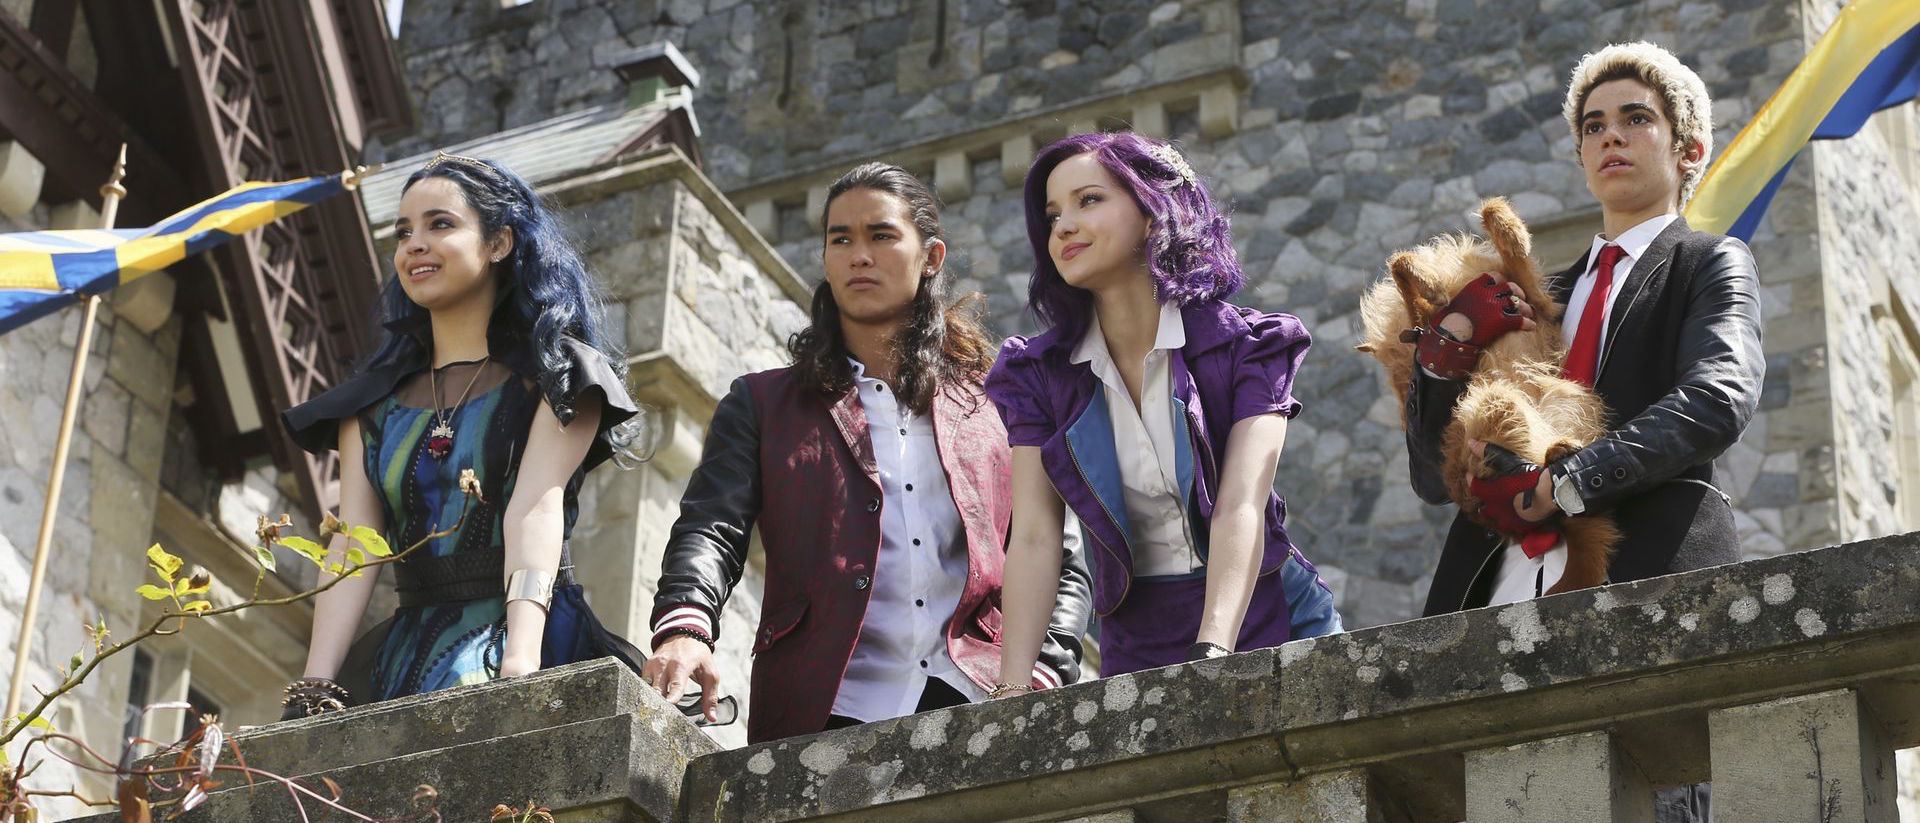 Descendants Image HD Wallpaper And Background Photos